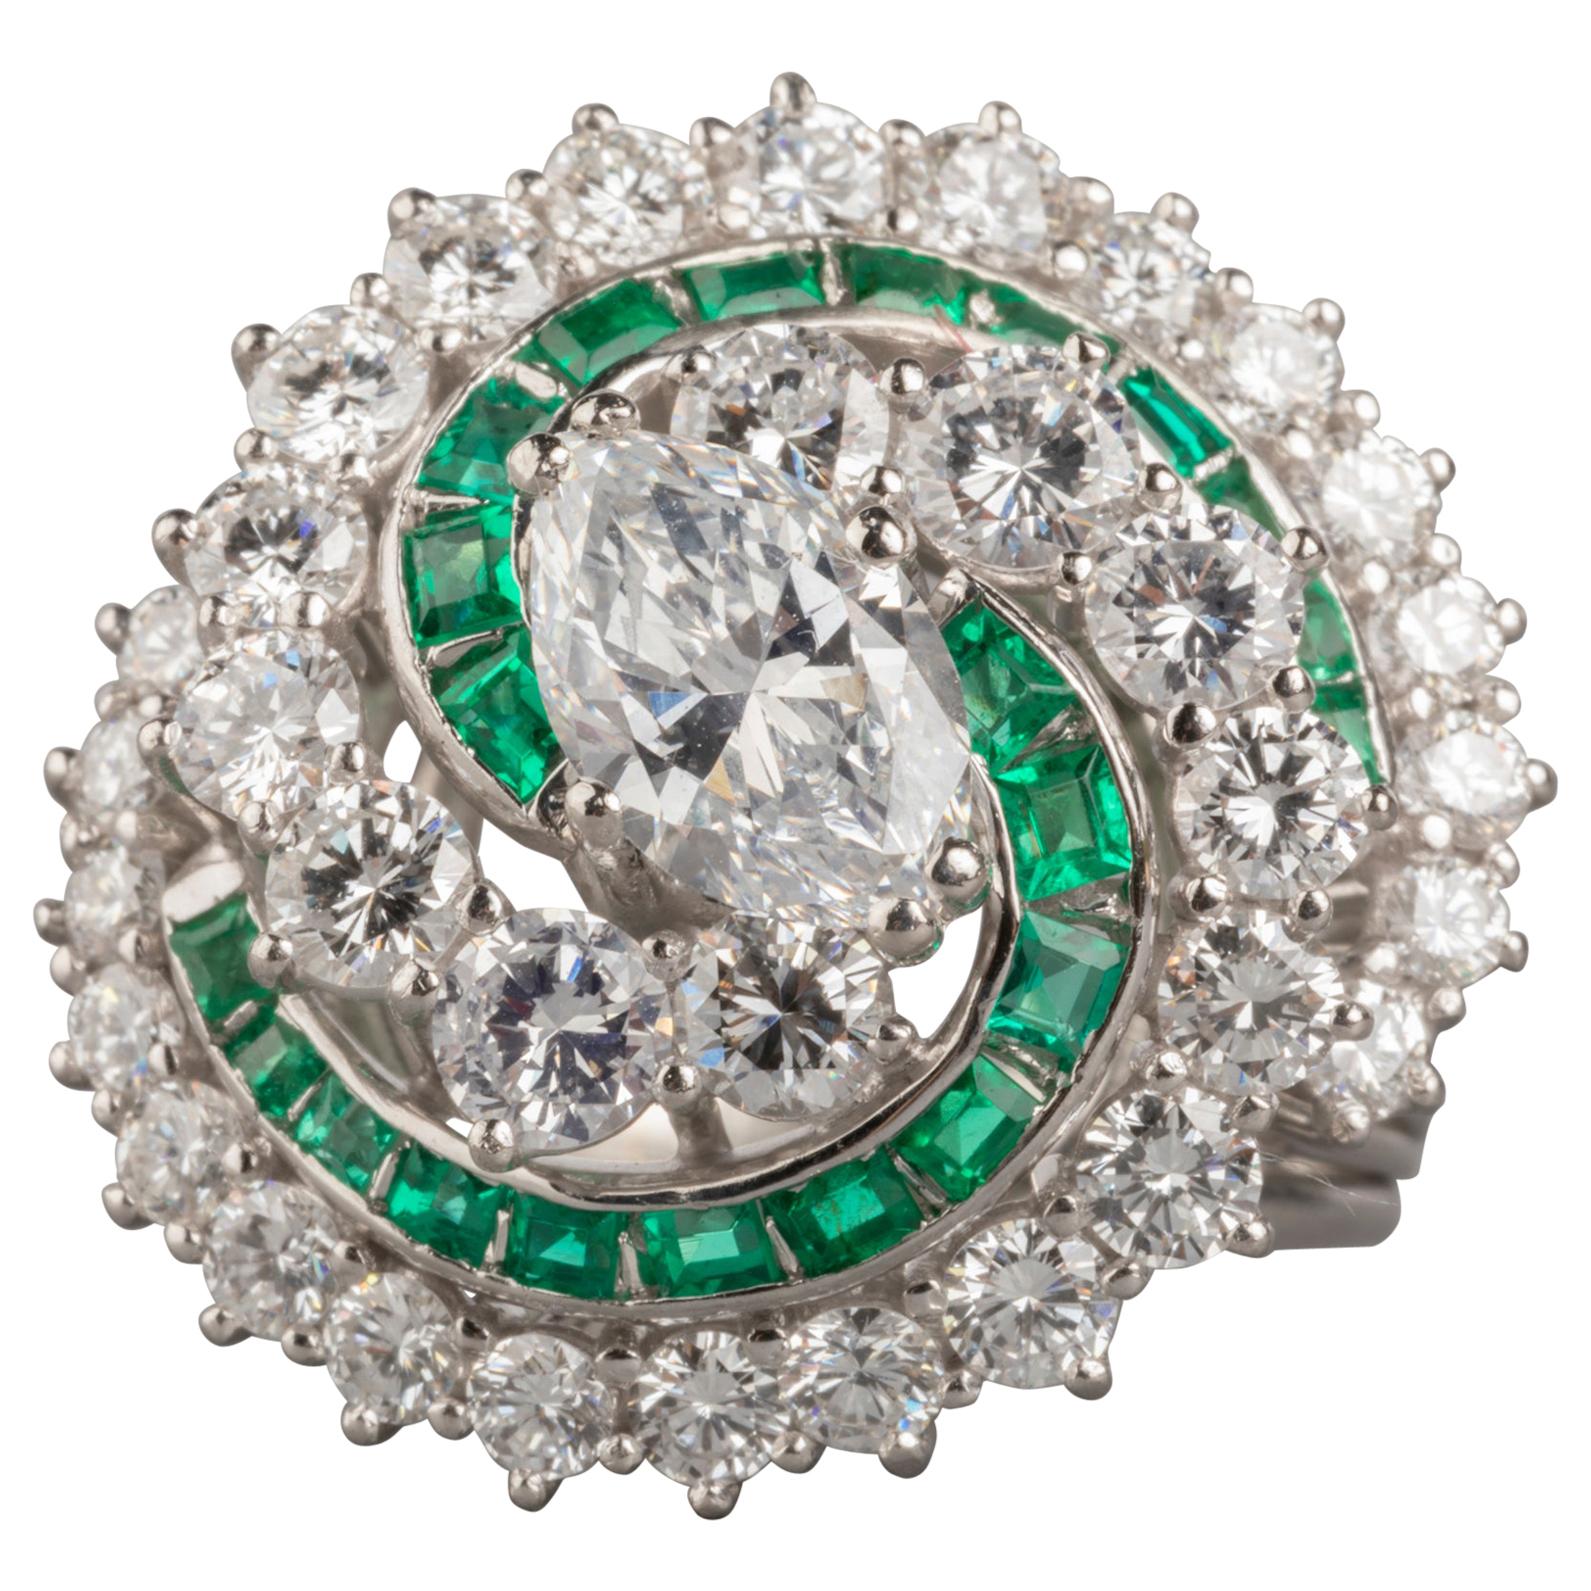 Certified 1.24 Carat Dvs2 Diamond and Emeralds French Cocktail Ring For Sale